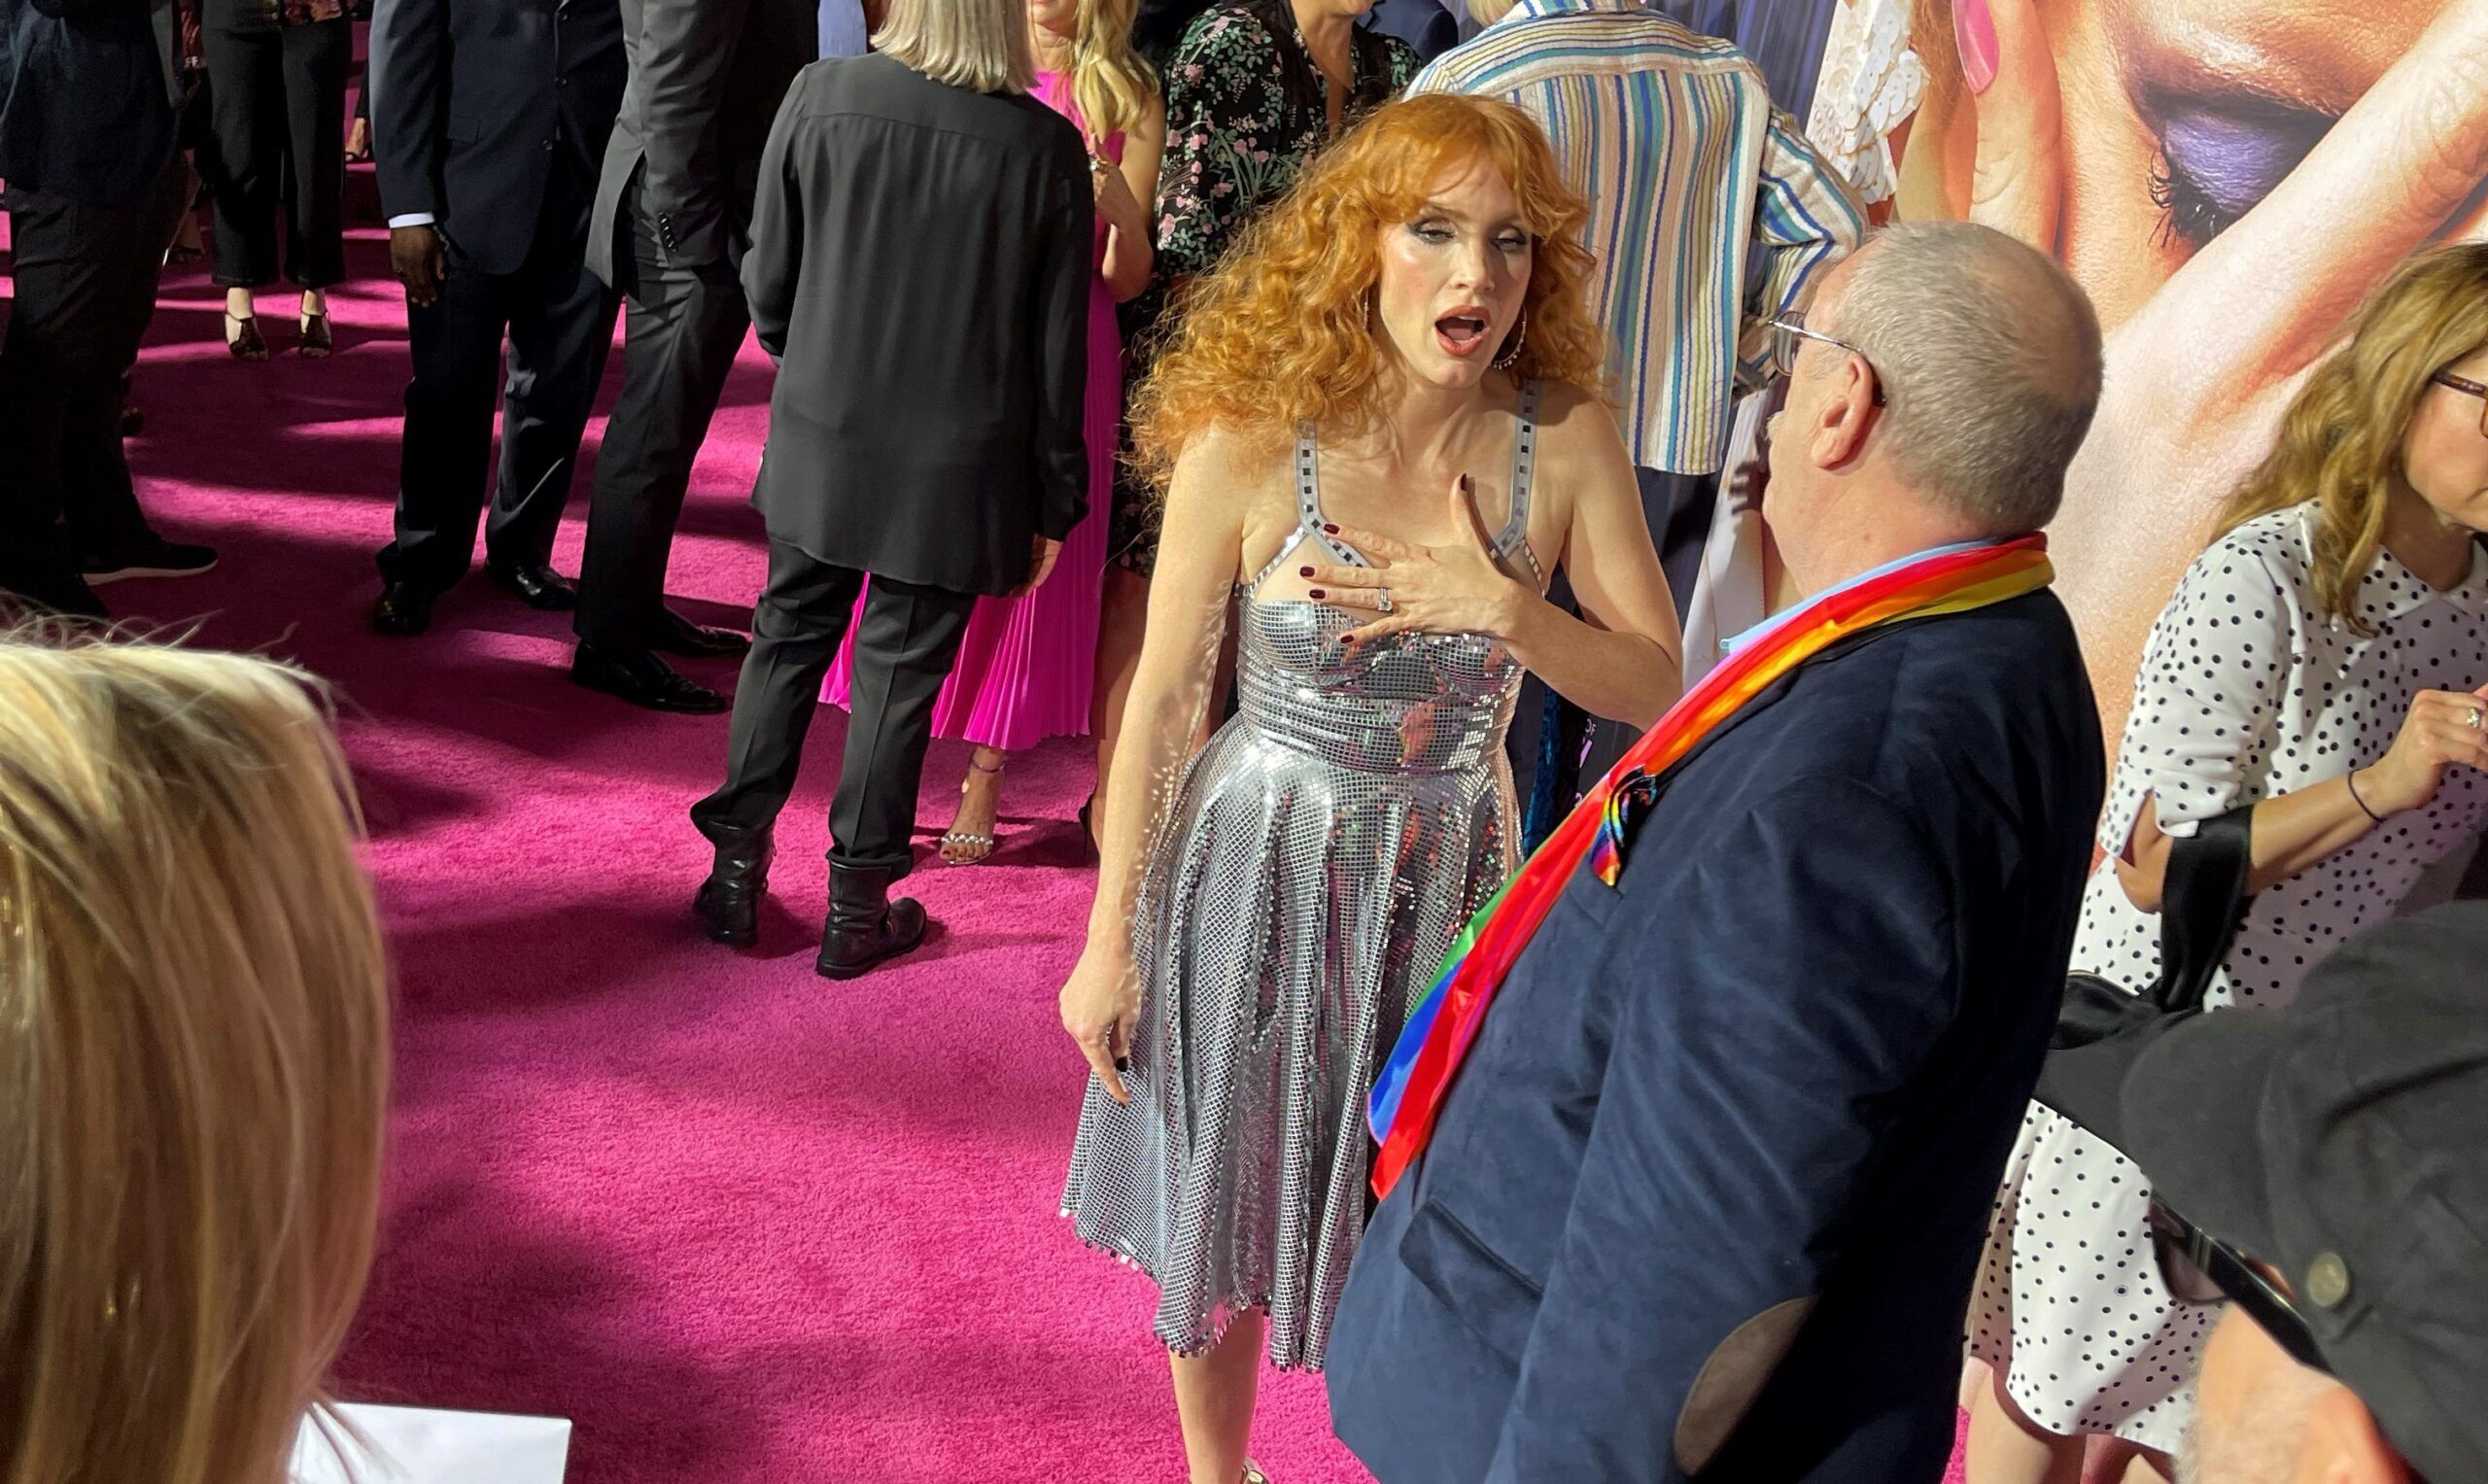 Jessica Chastain spots Rev. Steve Pieters on the red carpet and realizes who he is.